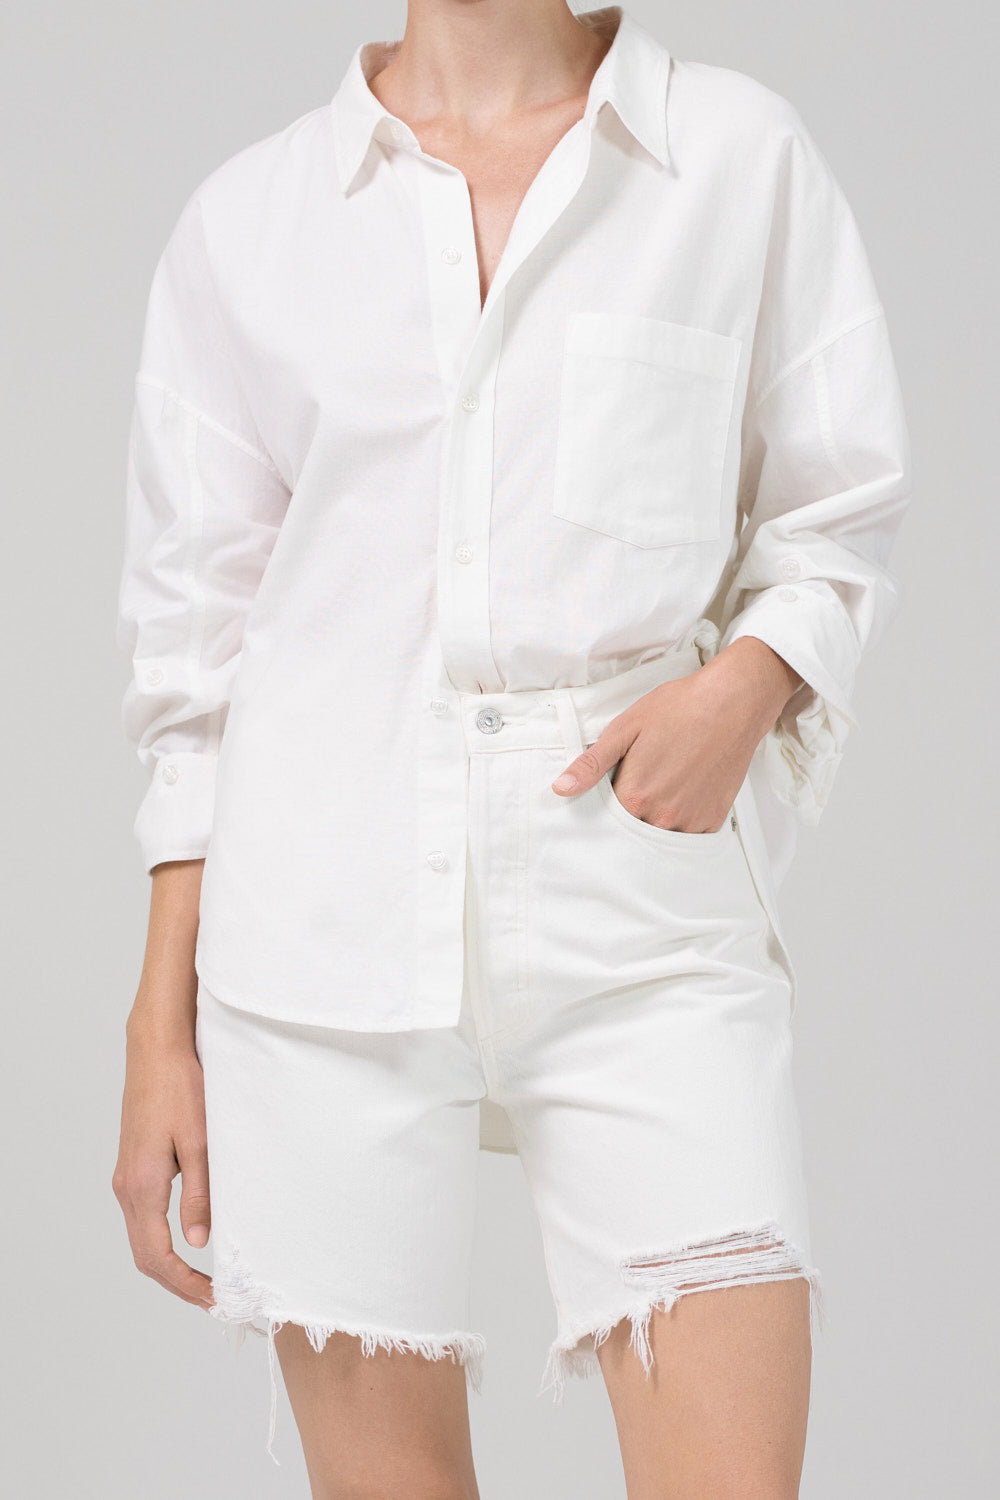 Citizens-of-Humanity-Brinkley-Shirt-Oxford-White